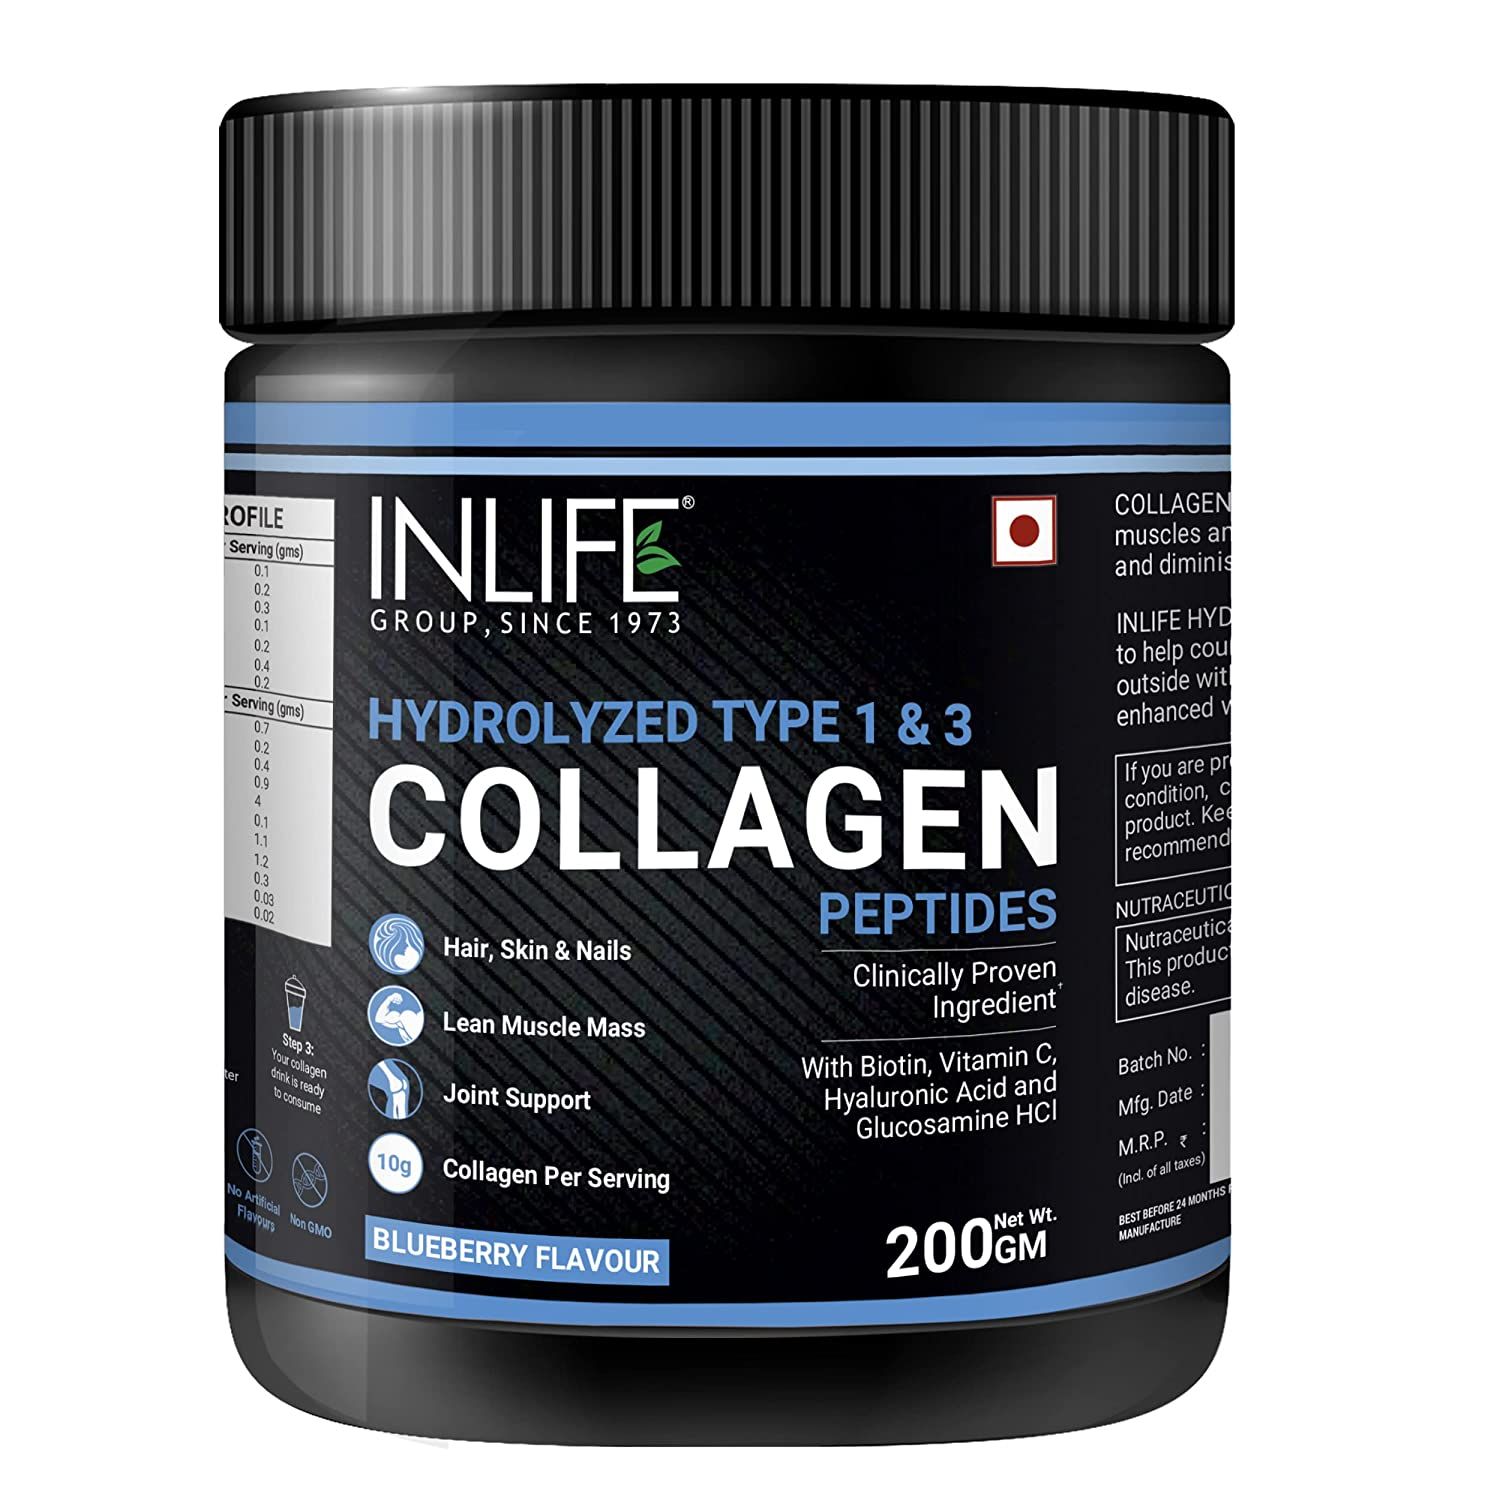 Inlife Hydrolyzed Collagen Peptides Powder Blueberry Flavour Image